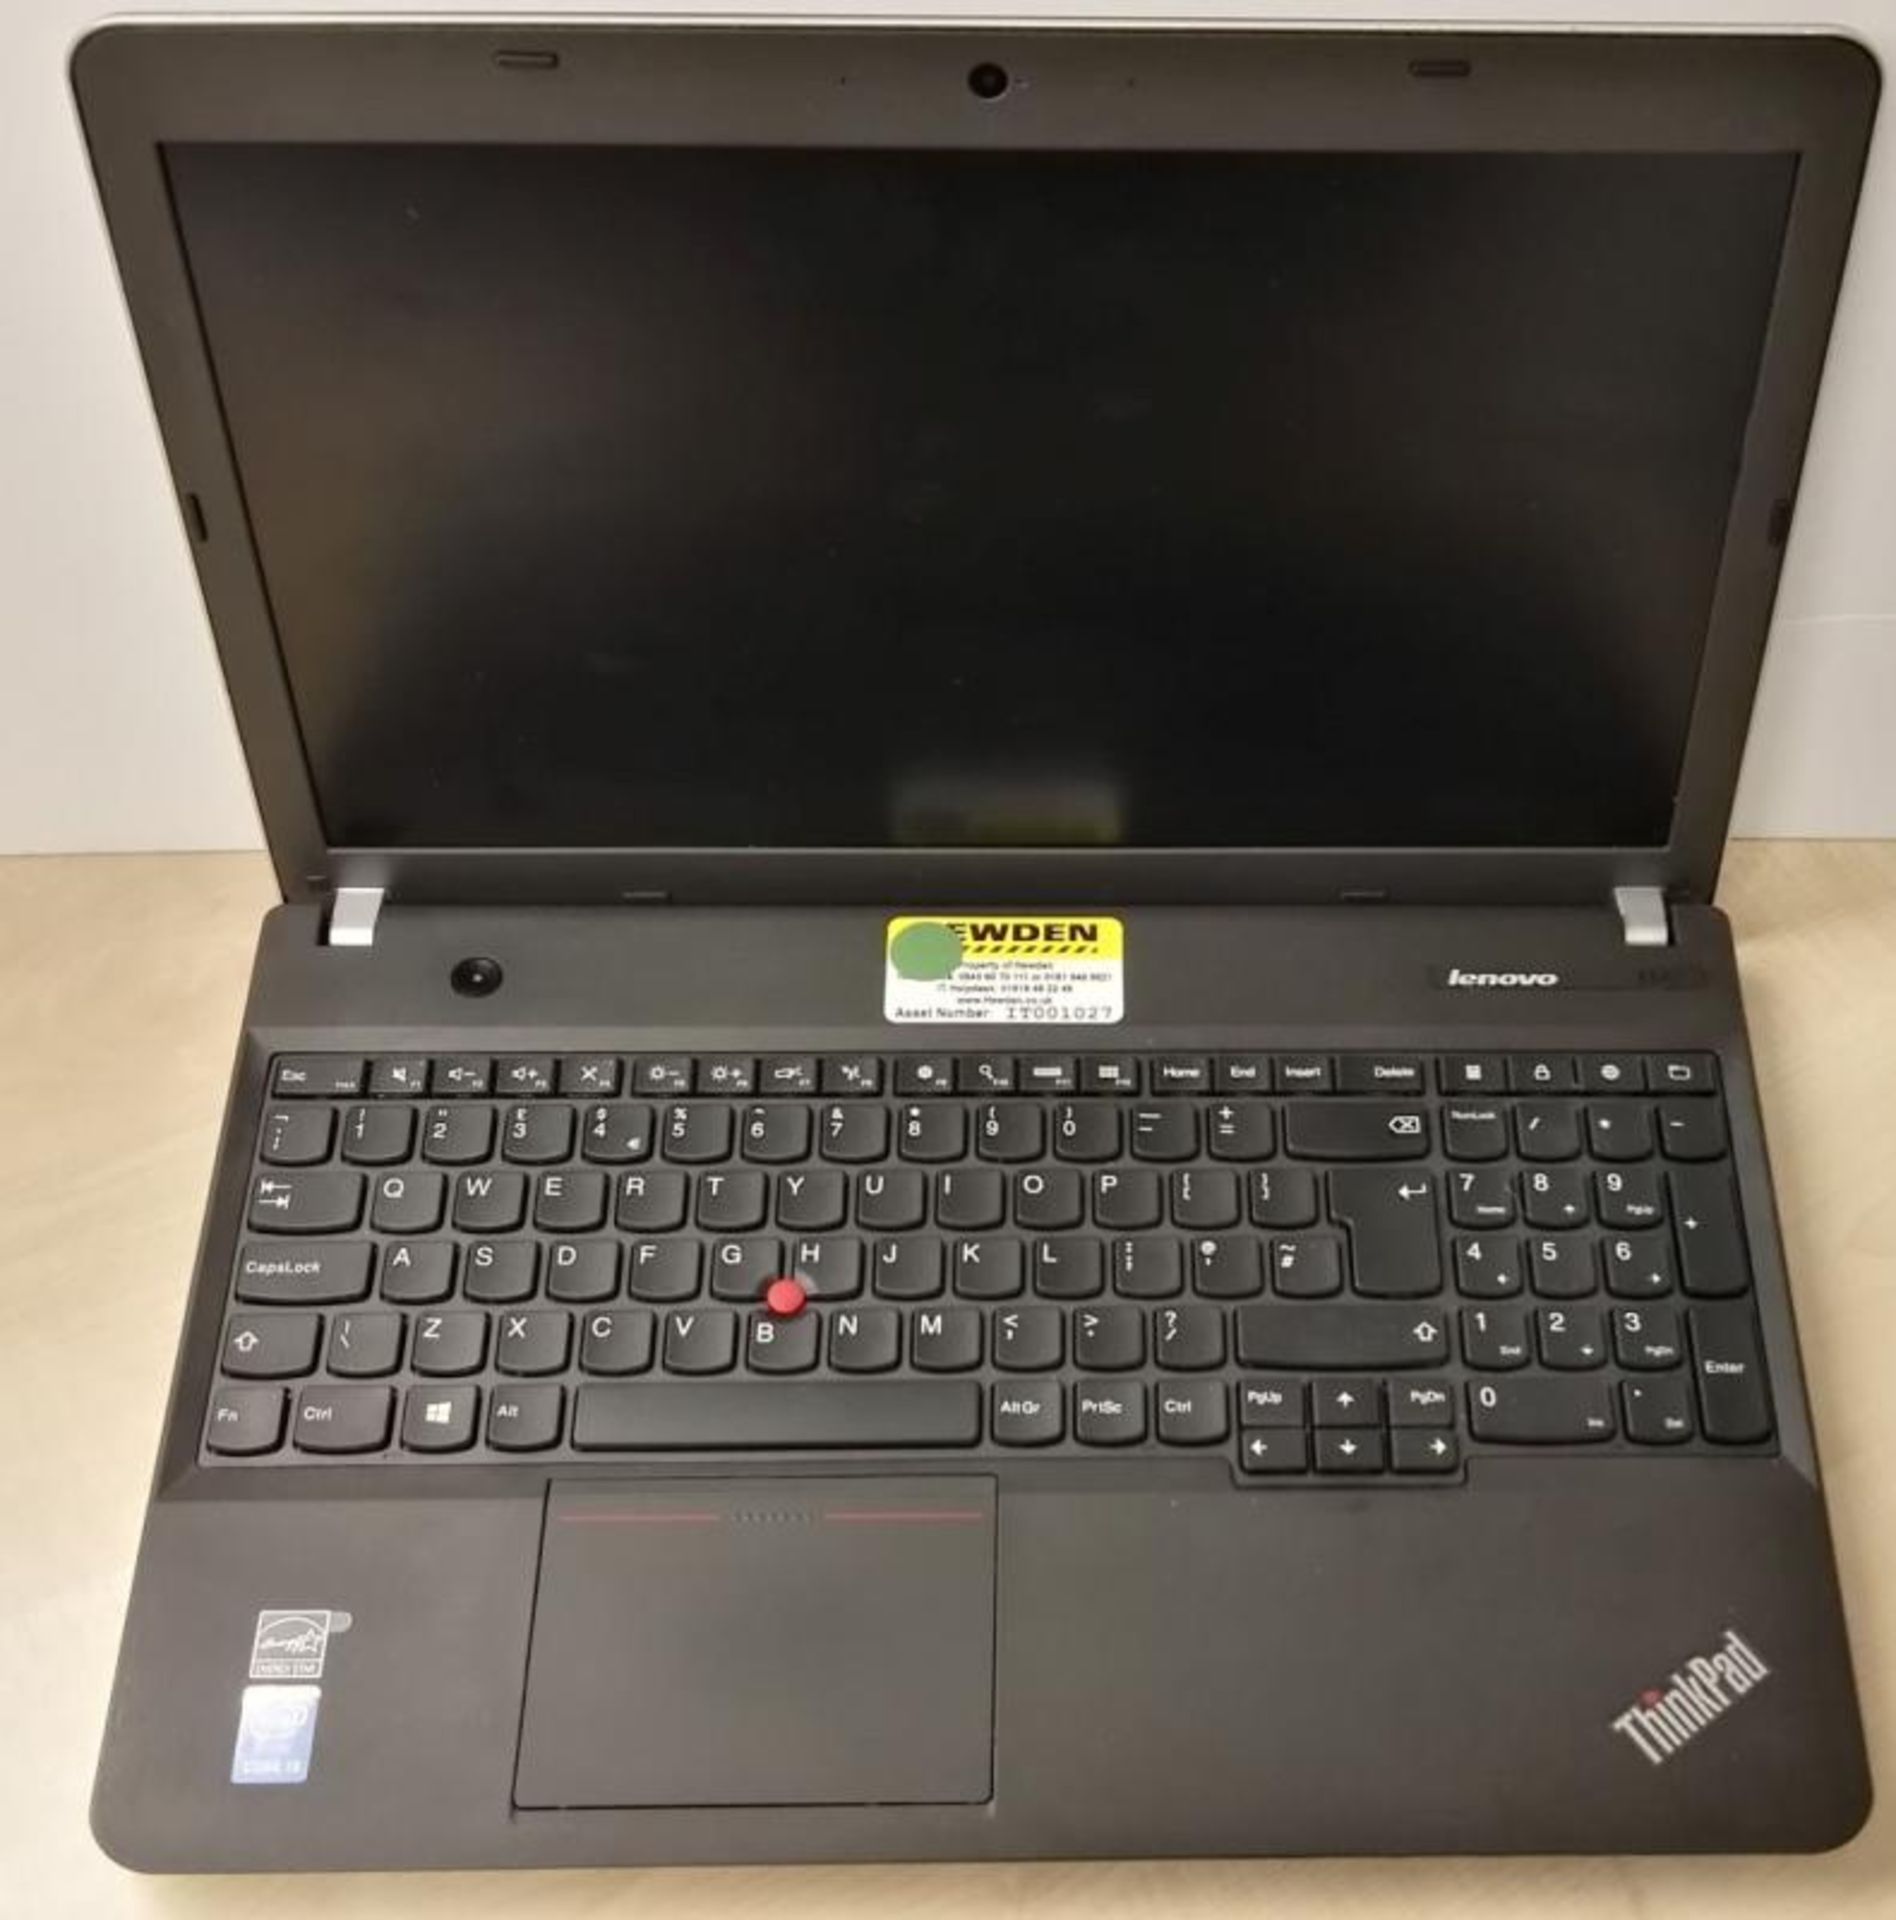 1 x Lenovo Thinkpad E540 i3 Laptop Computer - Features a 15.6 Inch Screen, Intel i3-4000M 2.4GHz Pro - Image 3 of 7